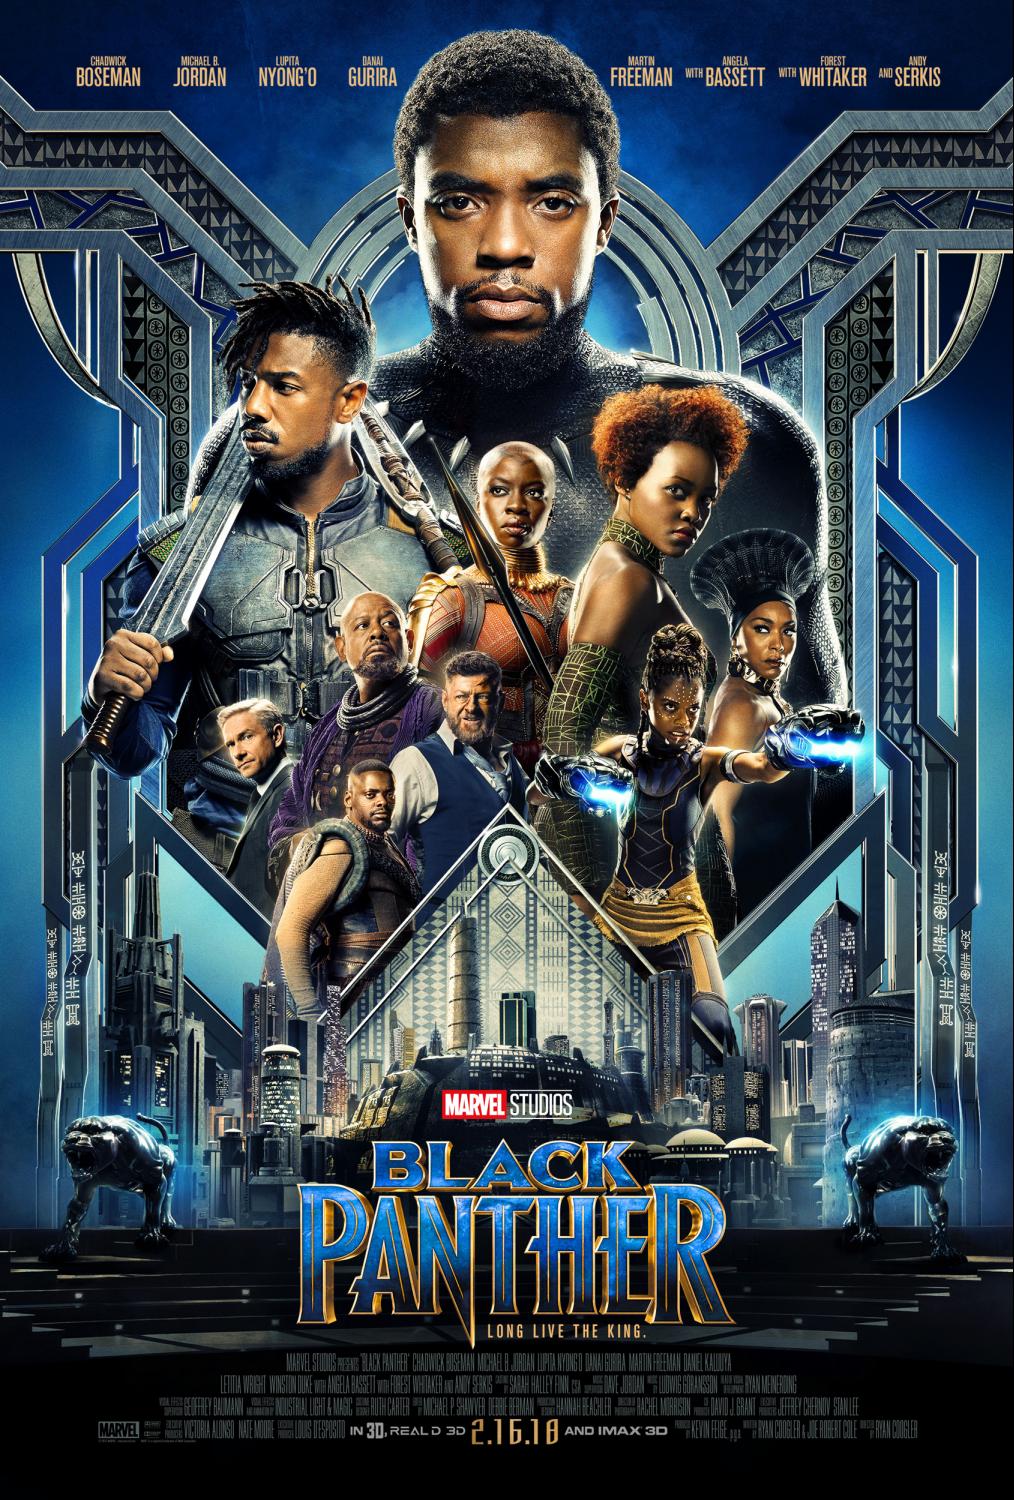 Susan's Disney Family: Black Panther is in theaters now! #BlackPanther